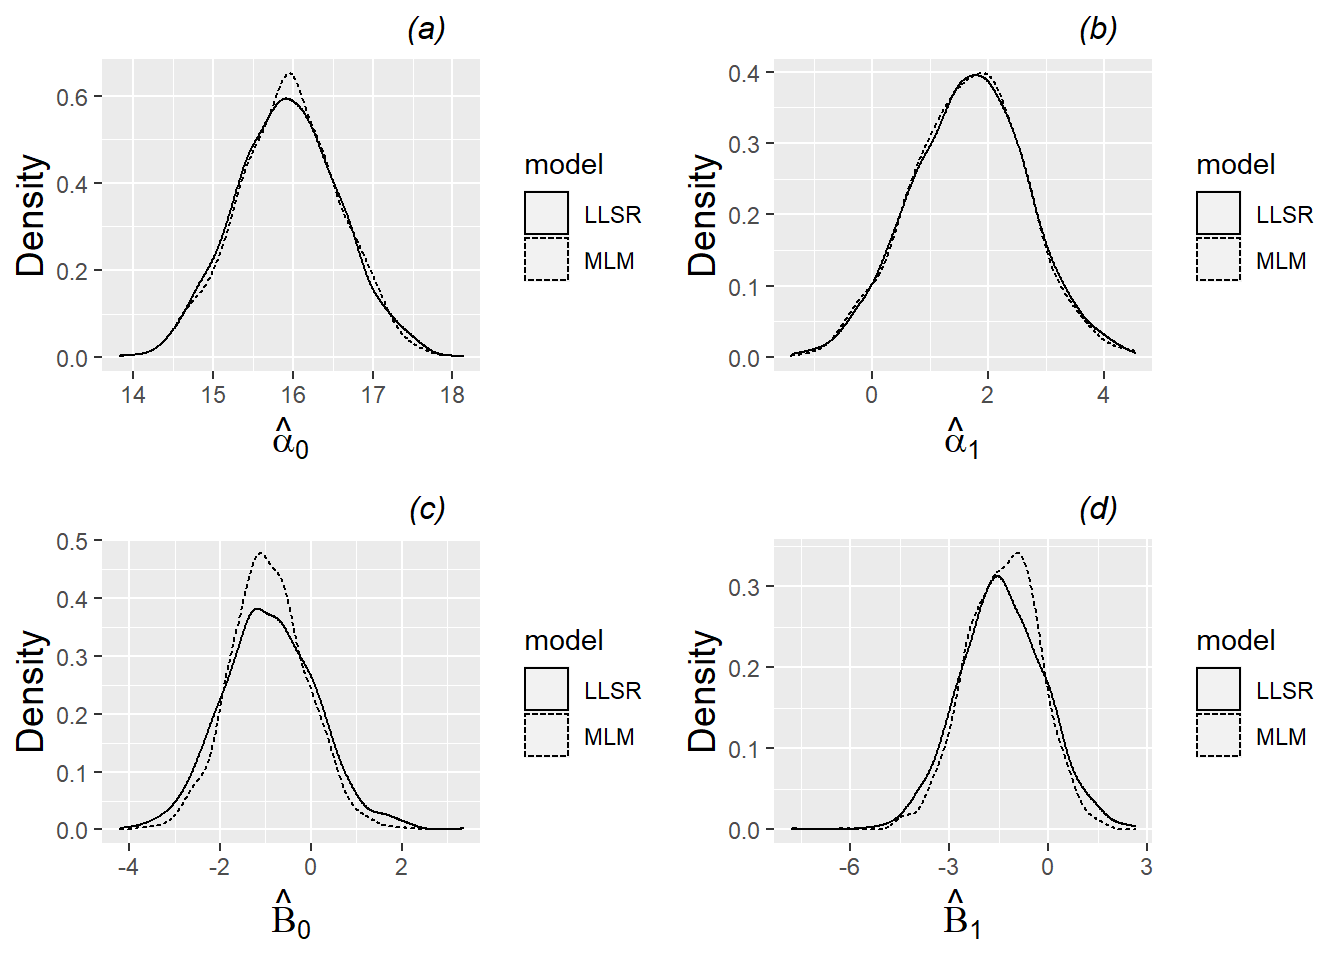 Density plots of parameter estimates for the four fixed effects of Model C under both a multilevel model and linear least squares regression. 1000 sets of simulated data for the 37 subjects in our study were produced using estimated fixed and random effects from Model C. For each set of simulated data, estimates of (a) \(\alpha_{0}\), (b) \(\alpha_{1}\), (c) \(\beta_{0}\), and (d) \(\beta_{1}\) were obtained using both a multilevel and an LLSR model. Each plot then shows a density plot for the 1000 estimates of the corresponding fixed effect using multilevel modeling vs. a similar density plot for the 1000 estimates using LLSR.